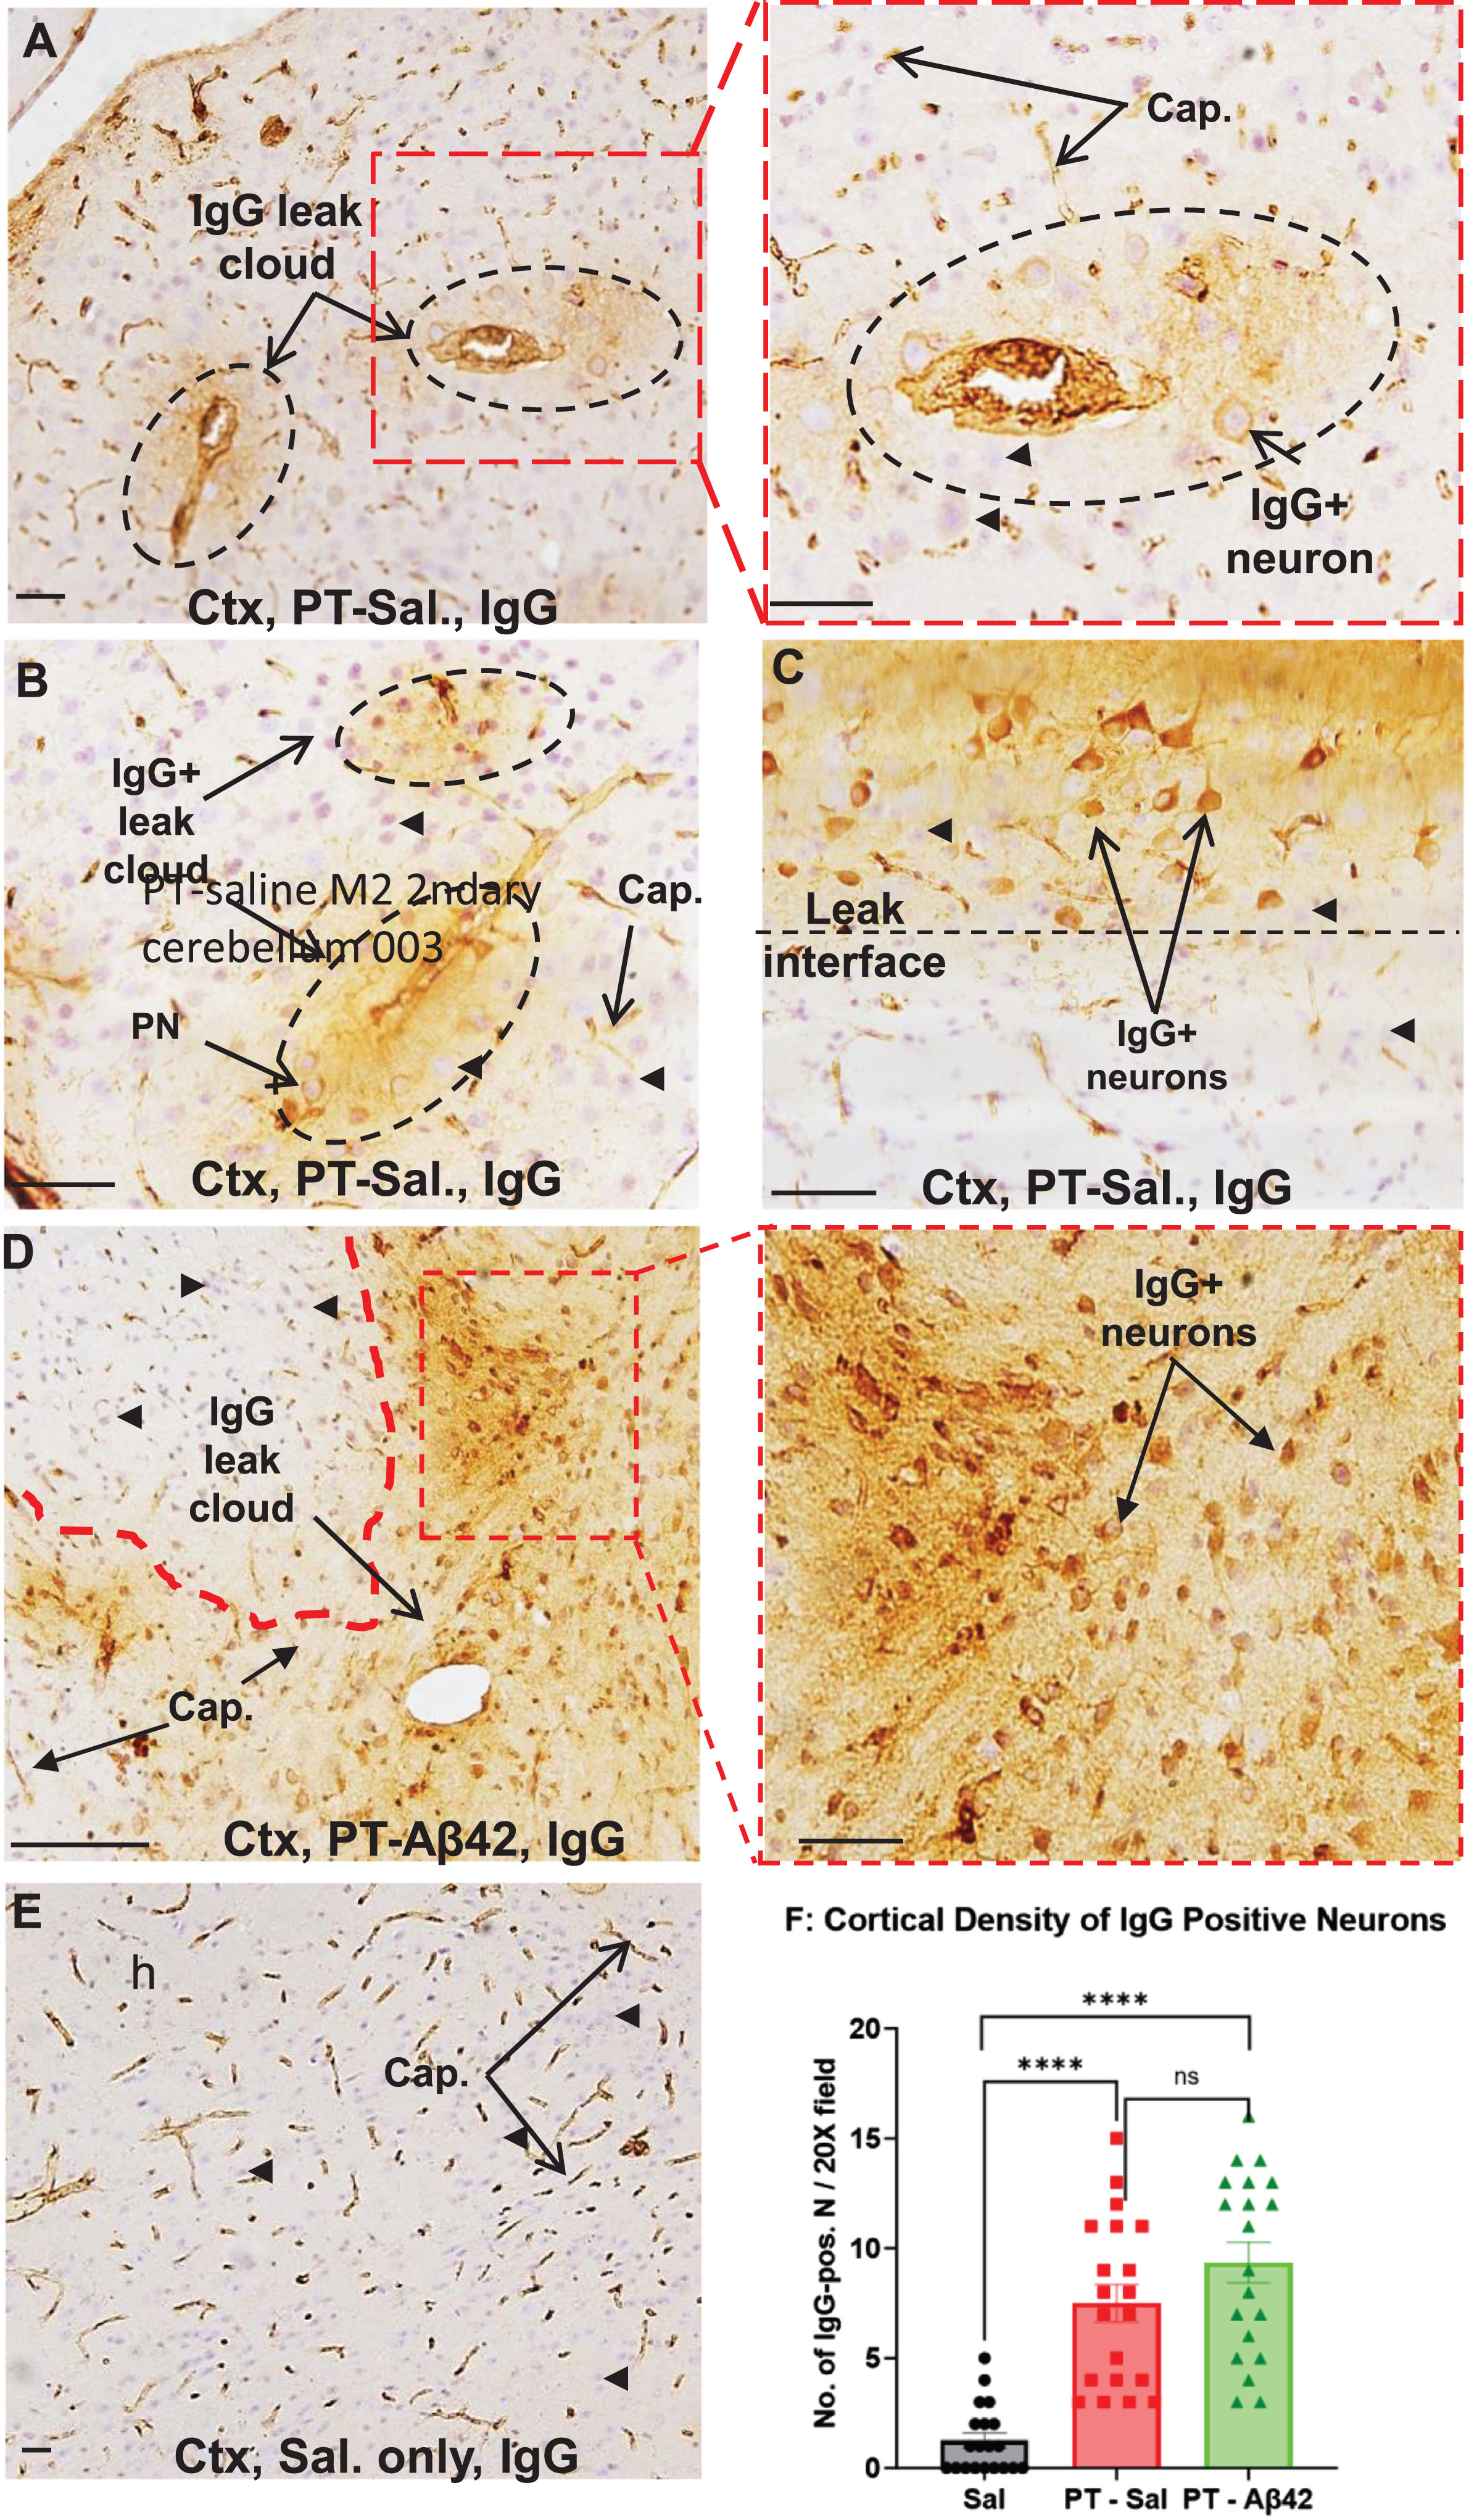 PT induces leak of plasma components and selective binding of IgG to local neurons. A–D) Histological sections from the mouse cerebral cortex (Ctx) showing the effects of long-term PT treatment on BBB permeability. BBB leak was revealed as increased IgG immunoreactivity either widespread throughout the parenchyma or as more focused perivascular leak clouds (enclosed by dashed circles), with sharp interfaces (C, D) of IgG immunoreactivity often observed. IgG-immunopositive neurons were present within or in the vicinity of leak clouds (A, C, D). Neurons positioned more remotely from the leak showed little or no IgG labeling (black arrowheads, A–C). D) PT-Aβ42 mice showed the most prominent IgG leaks and most extensive labeling of the neurons. The pyramidal neurons (PNs) outside of leak zones failed to demonstrate IgG immunoreactivity (black arrowheads). E) In the Sal-only group, IgG immunoreactivity was mostly localized within the blood vessels. F) Comparison between Sal-only and PT-Sal and Sal-only and PT-Aβ42 attained statistical significance (Mann-Whitney test, p < 0.0001). Though the PT-Aβ42 group demonstrated a higher number of PNs demonstrating IgG immunoreactivity compared to the PT-Sal group, it failed to attain statistical significance (Mann-Whitney test). Error bars indicate standard error of the mean (SEM). BV, blood vessel; Cap, capillary; Ctx, cerebral cortex. Scale bar = 50μm.